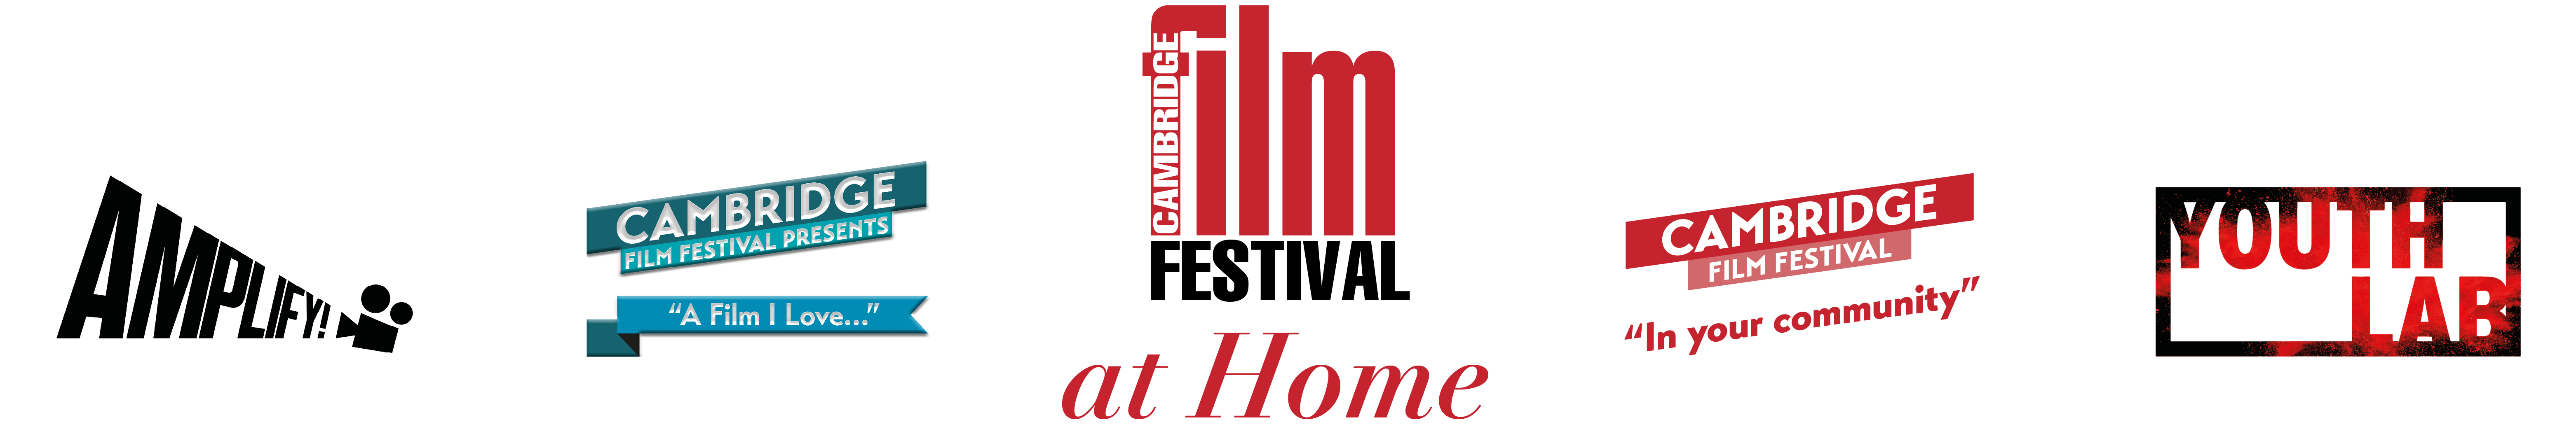 Cambridge Film Festival at home logo with element logos